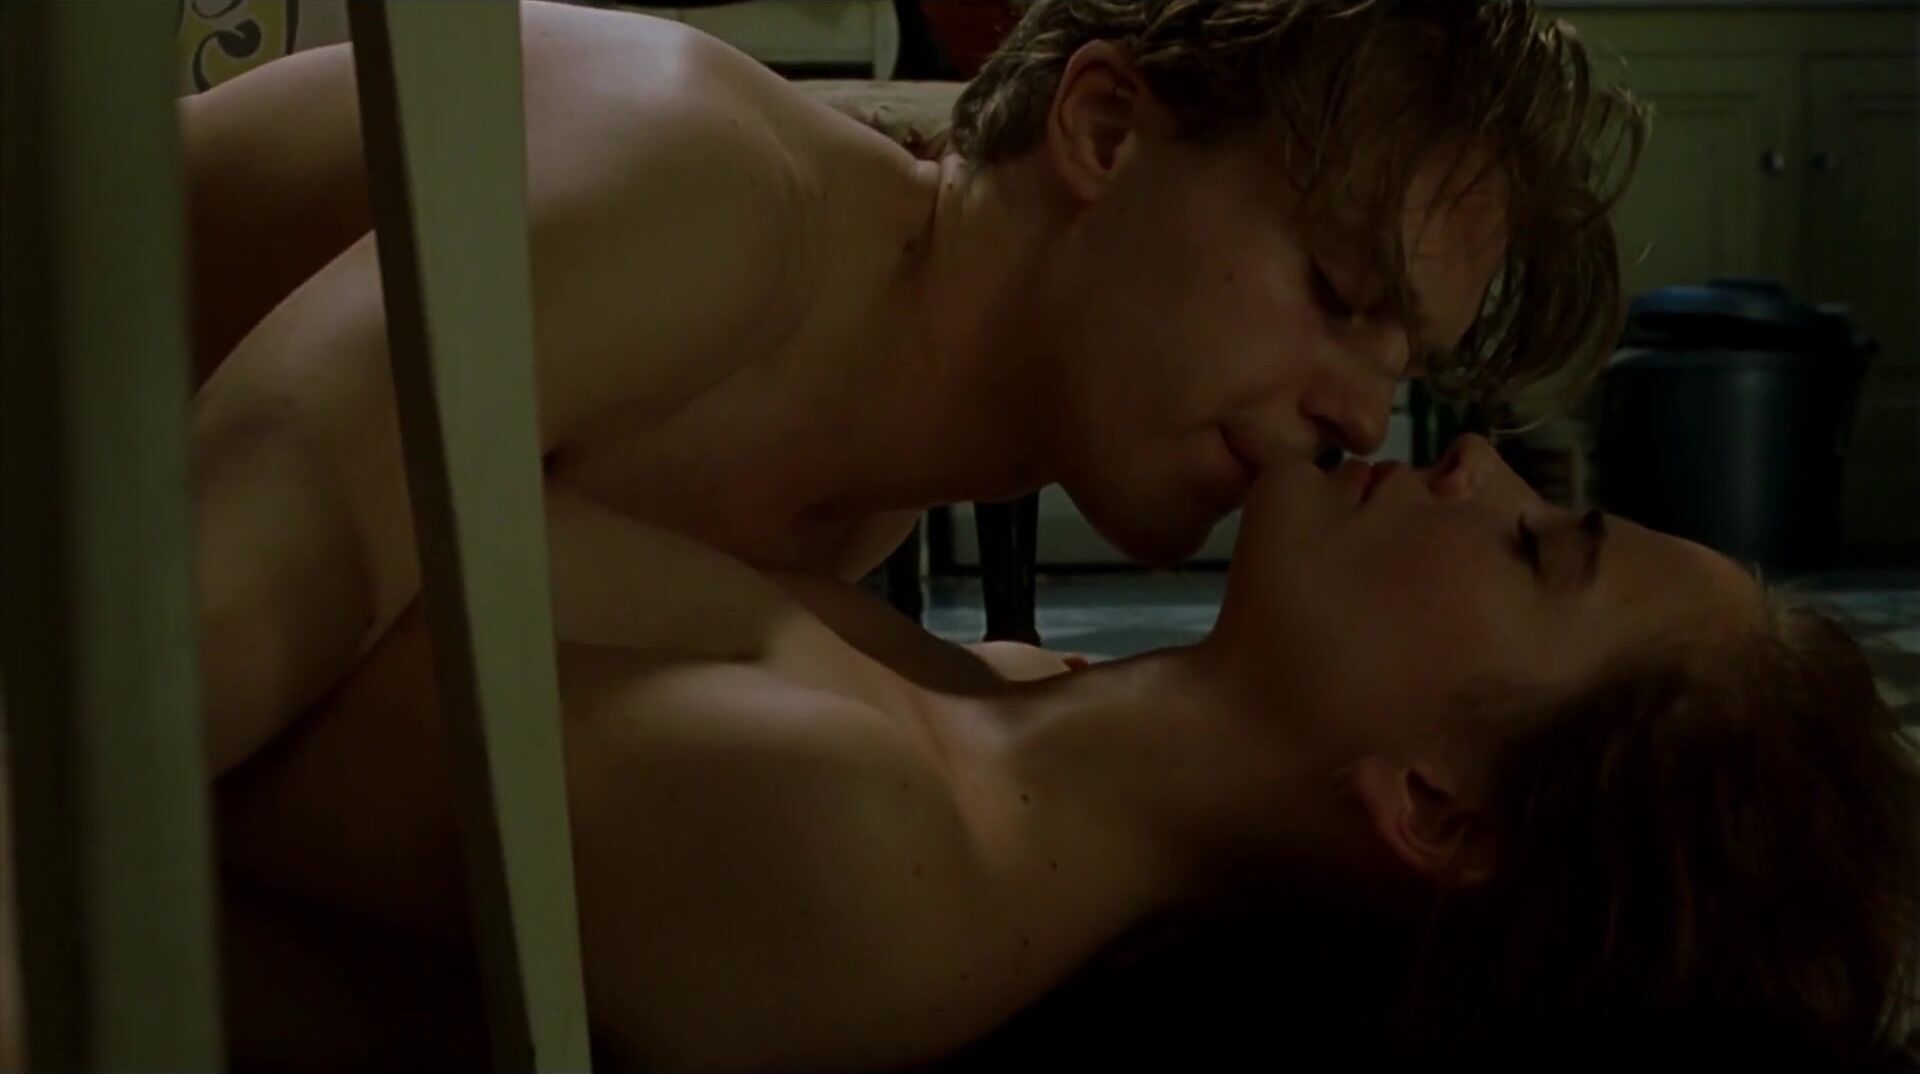 Suck Eva Green and loved man coerce innocent companion into banging in The Dreamer (2003) 3Rat